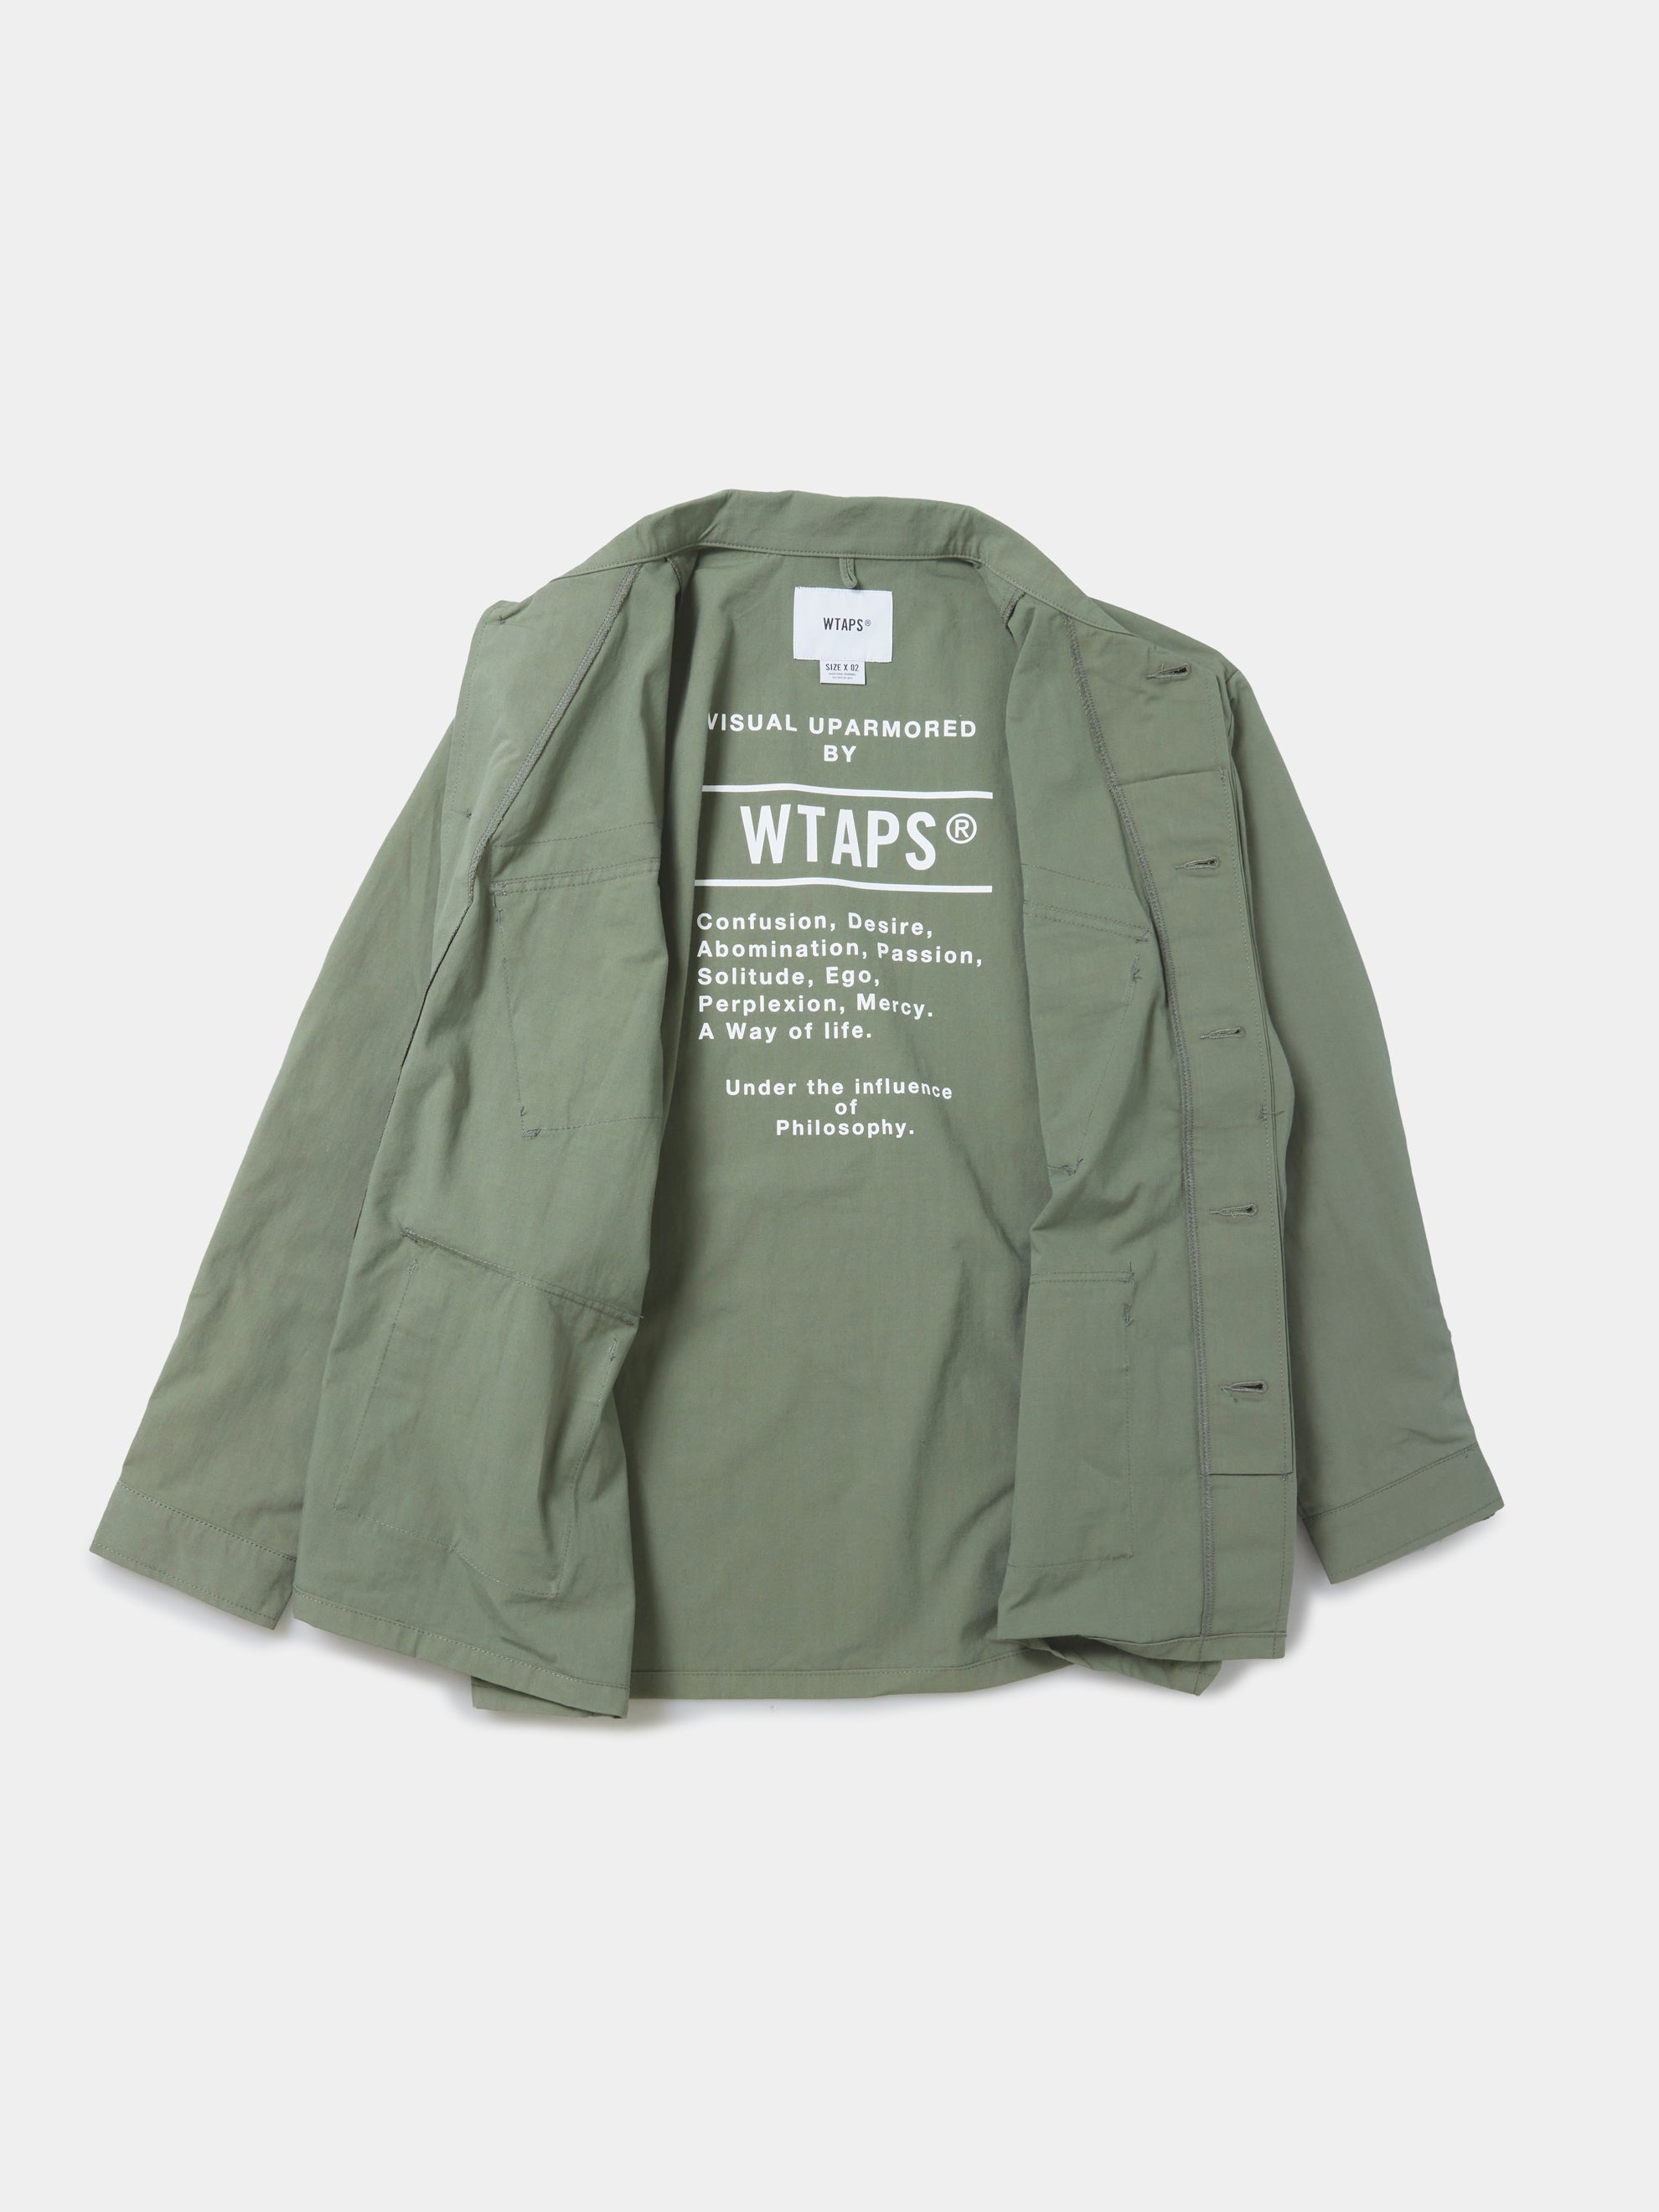 Buy Wtaps JUNGLE 02 / LS / NYCO. RIPSTOP Online at UNION LOS ANGELES